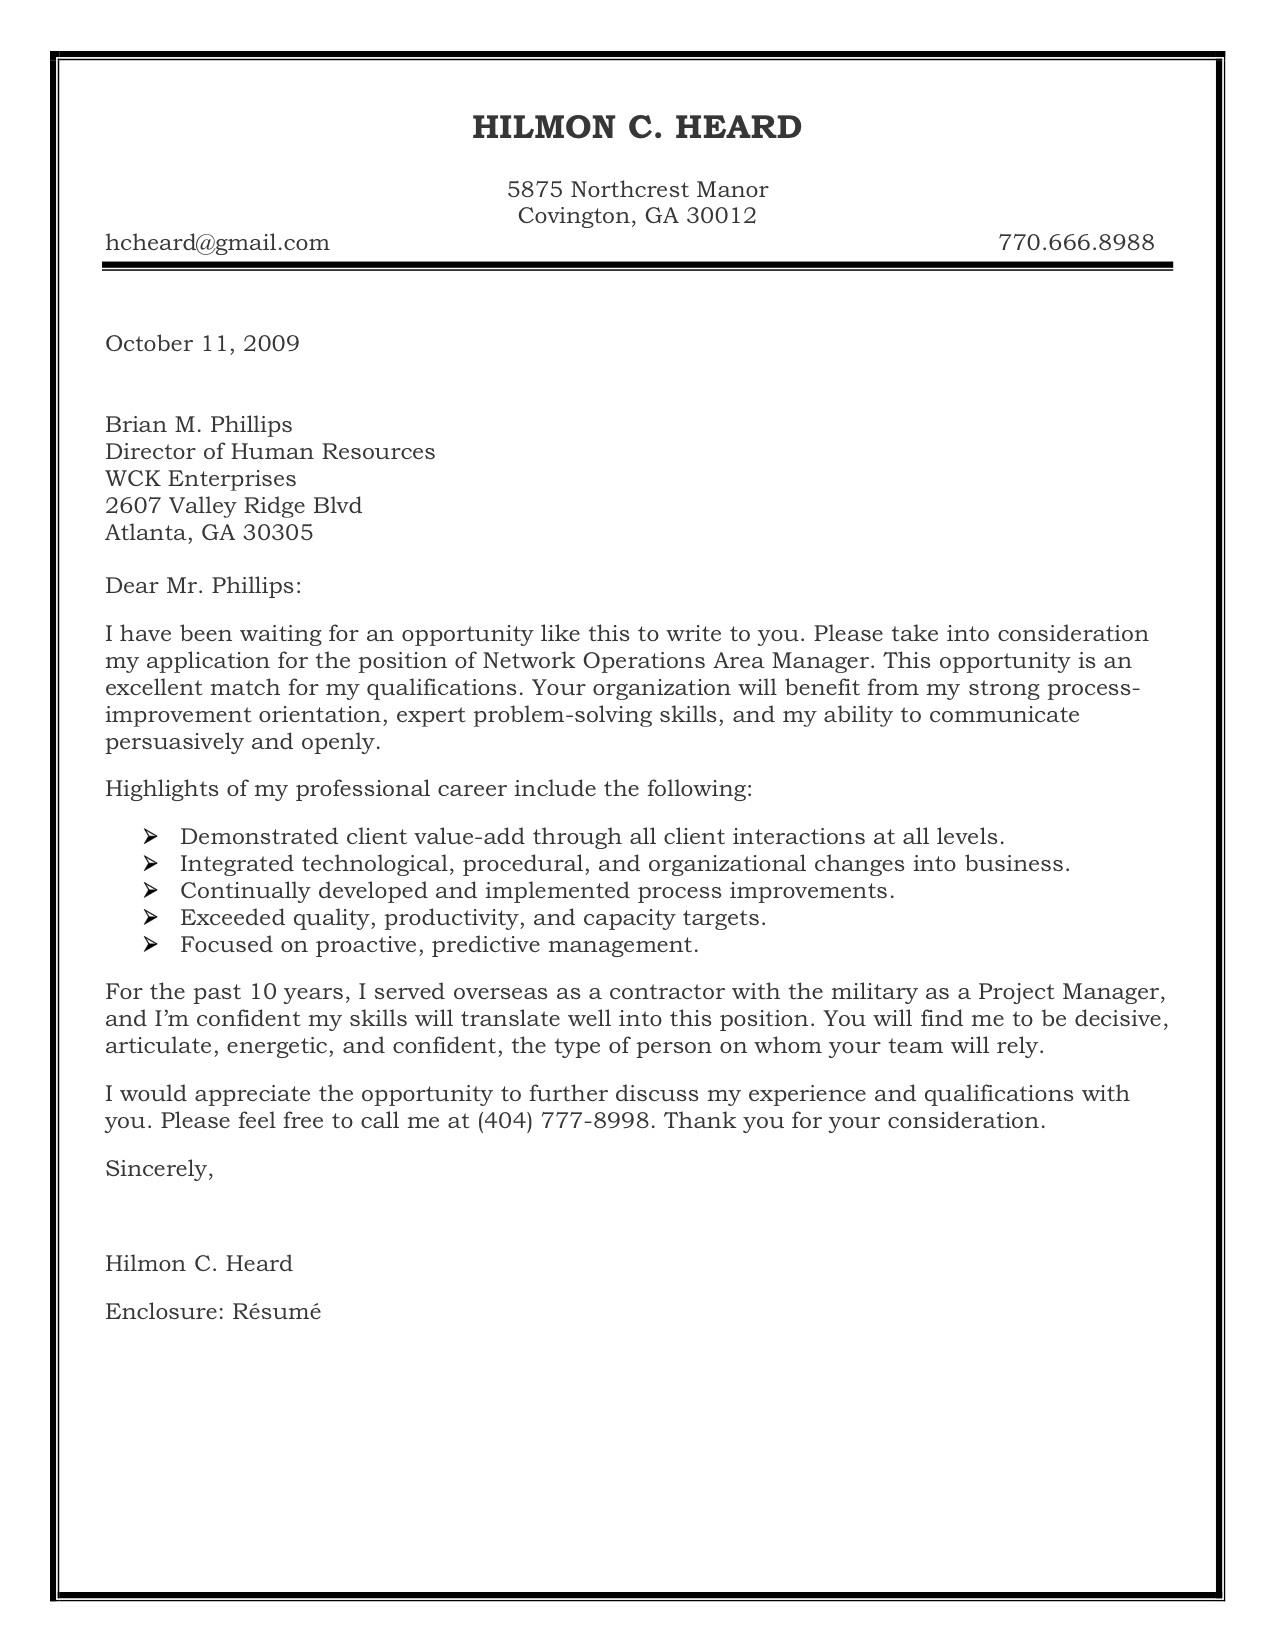 resume letters examples